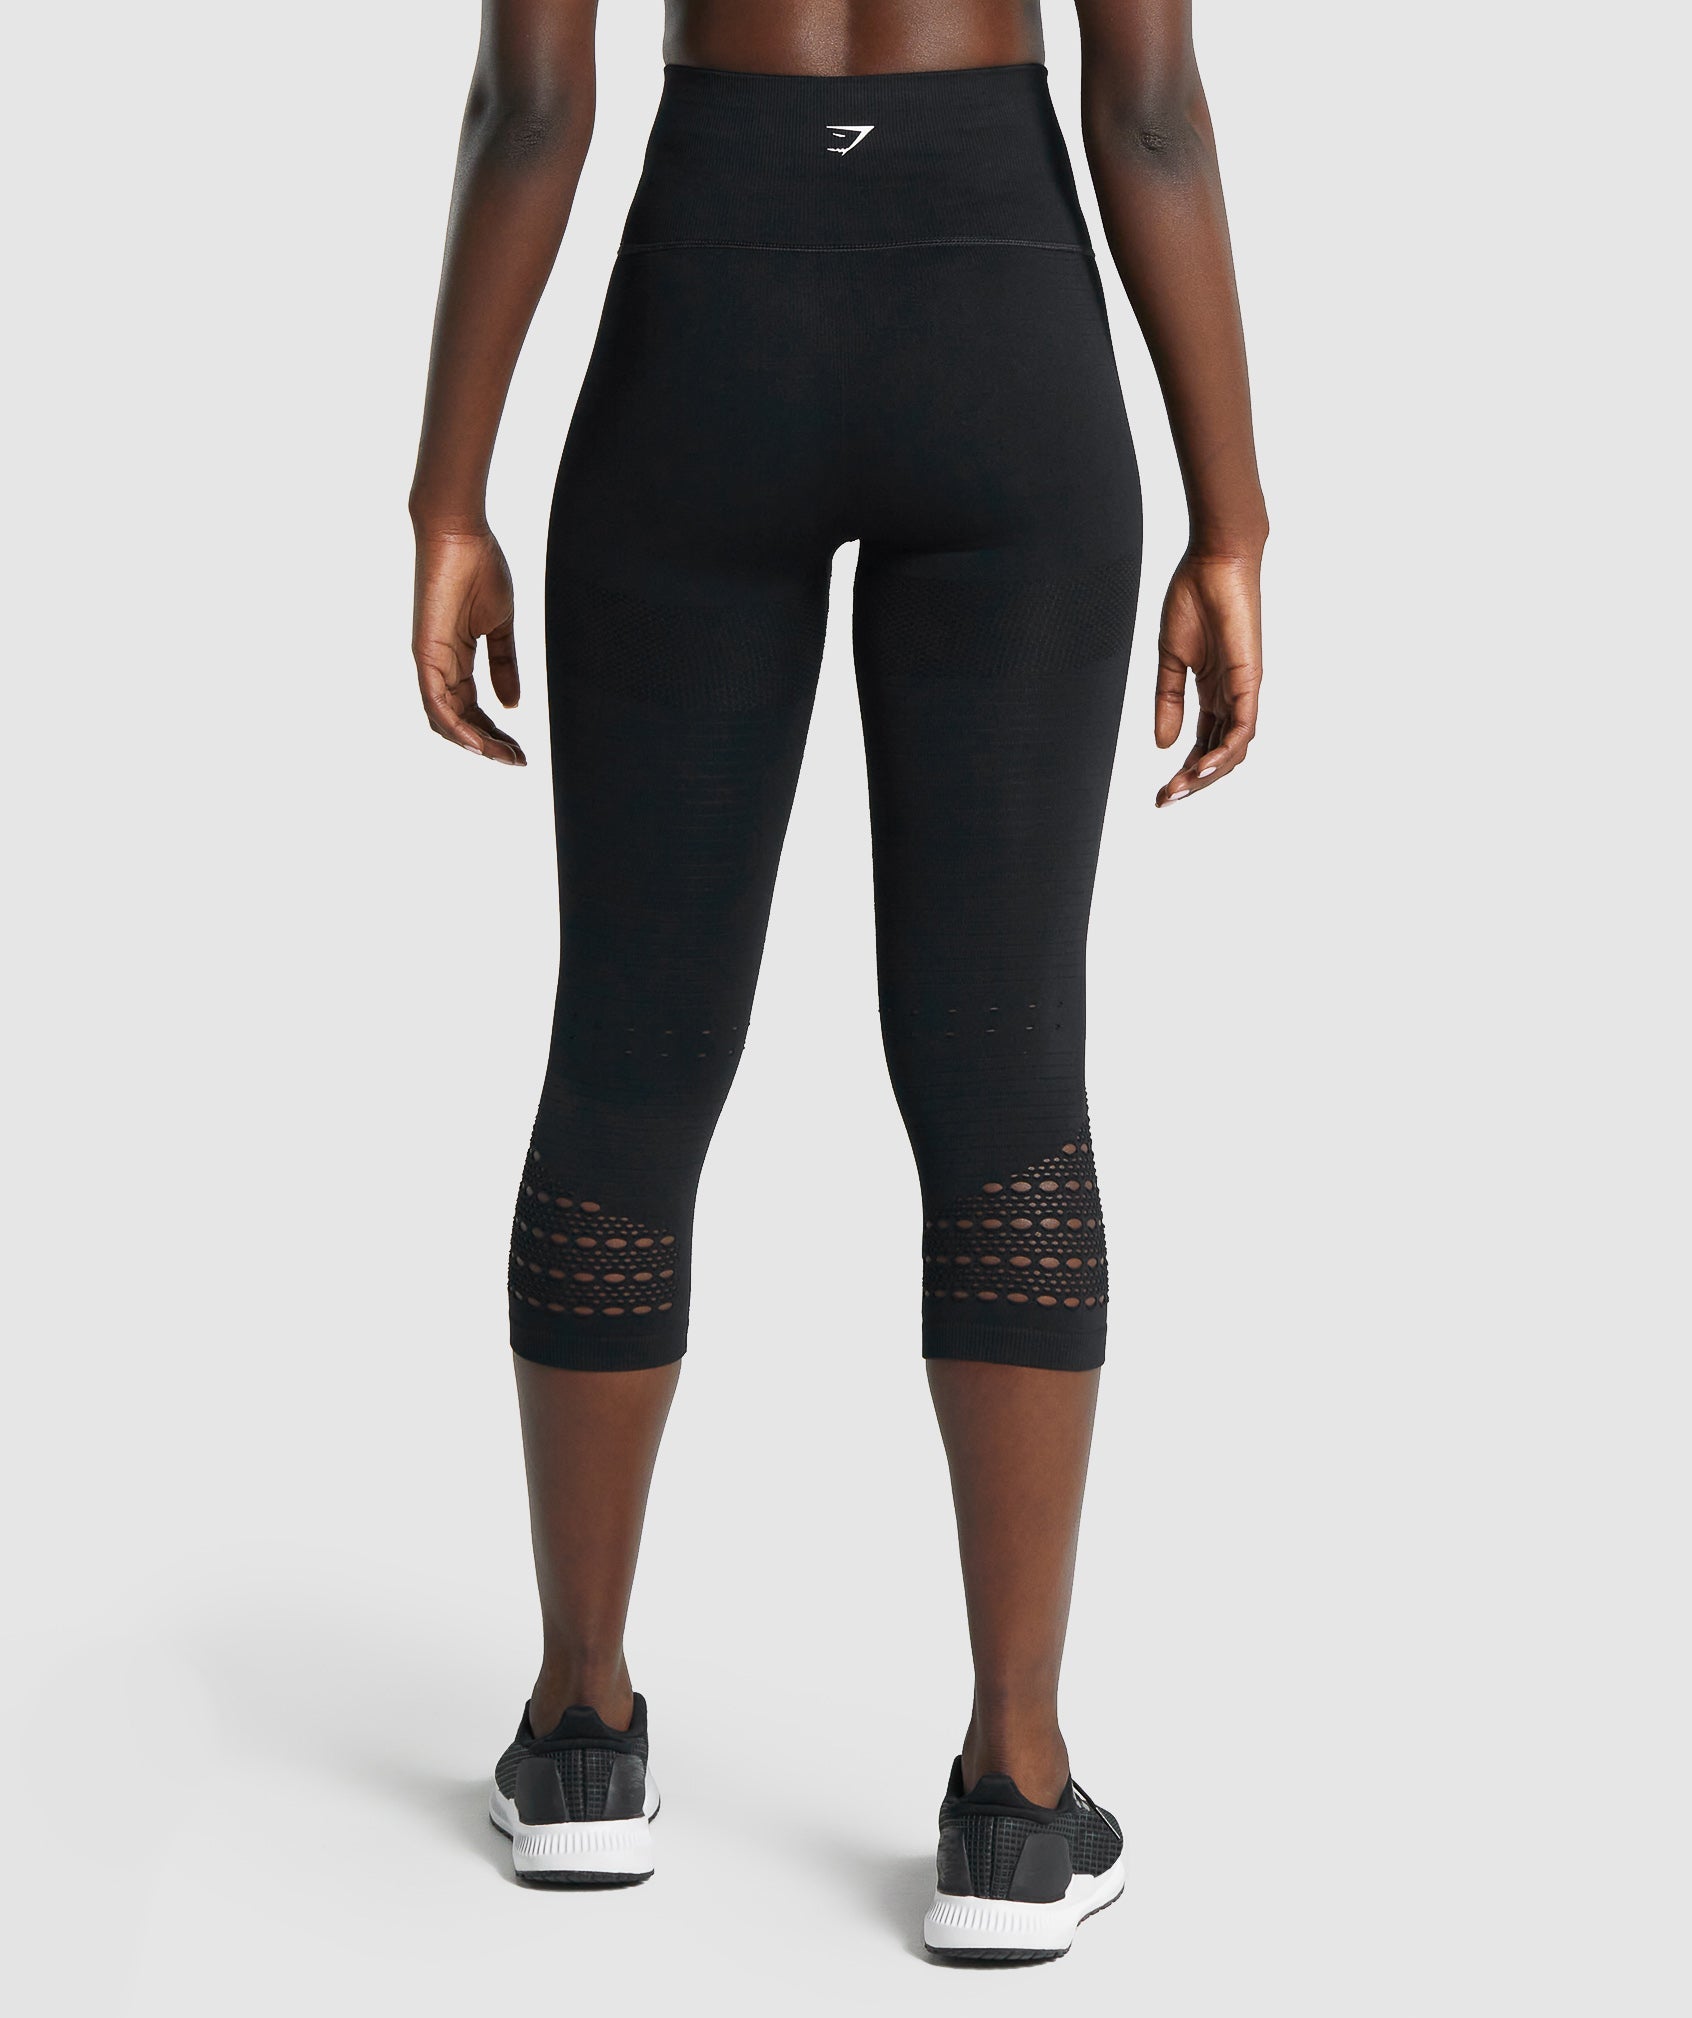 Gymshark Women's Laser Cut Tights - Black - SMALL/MEDIUM - NEW WITH TAGS!